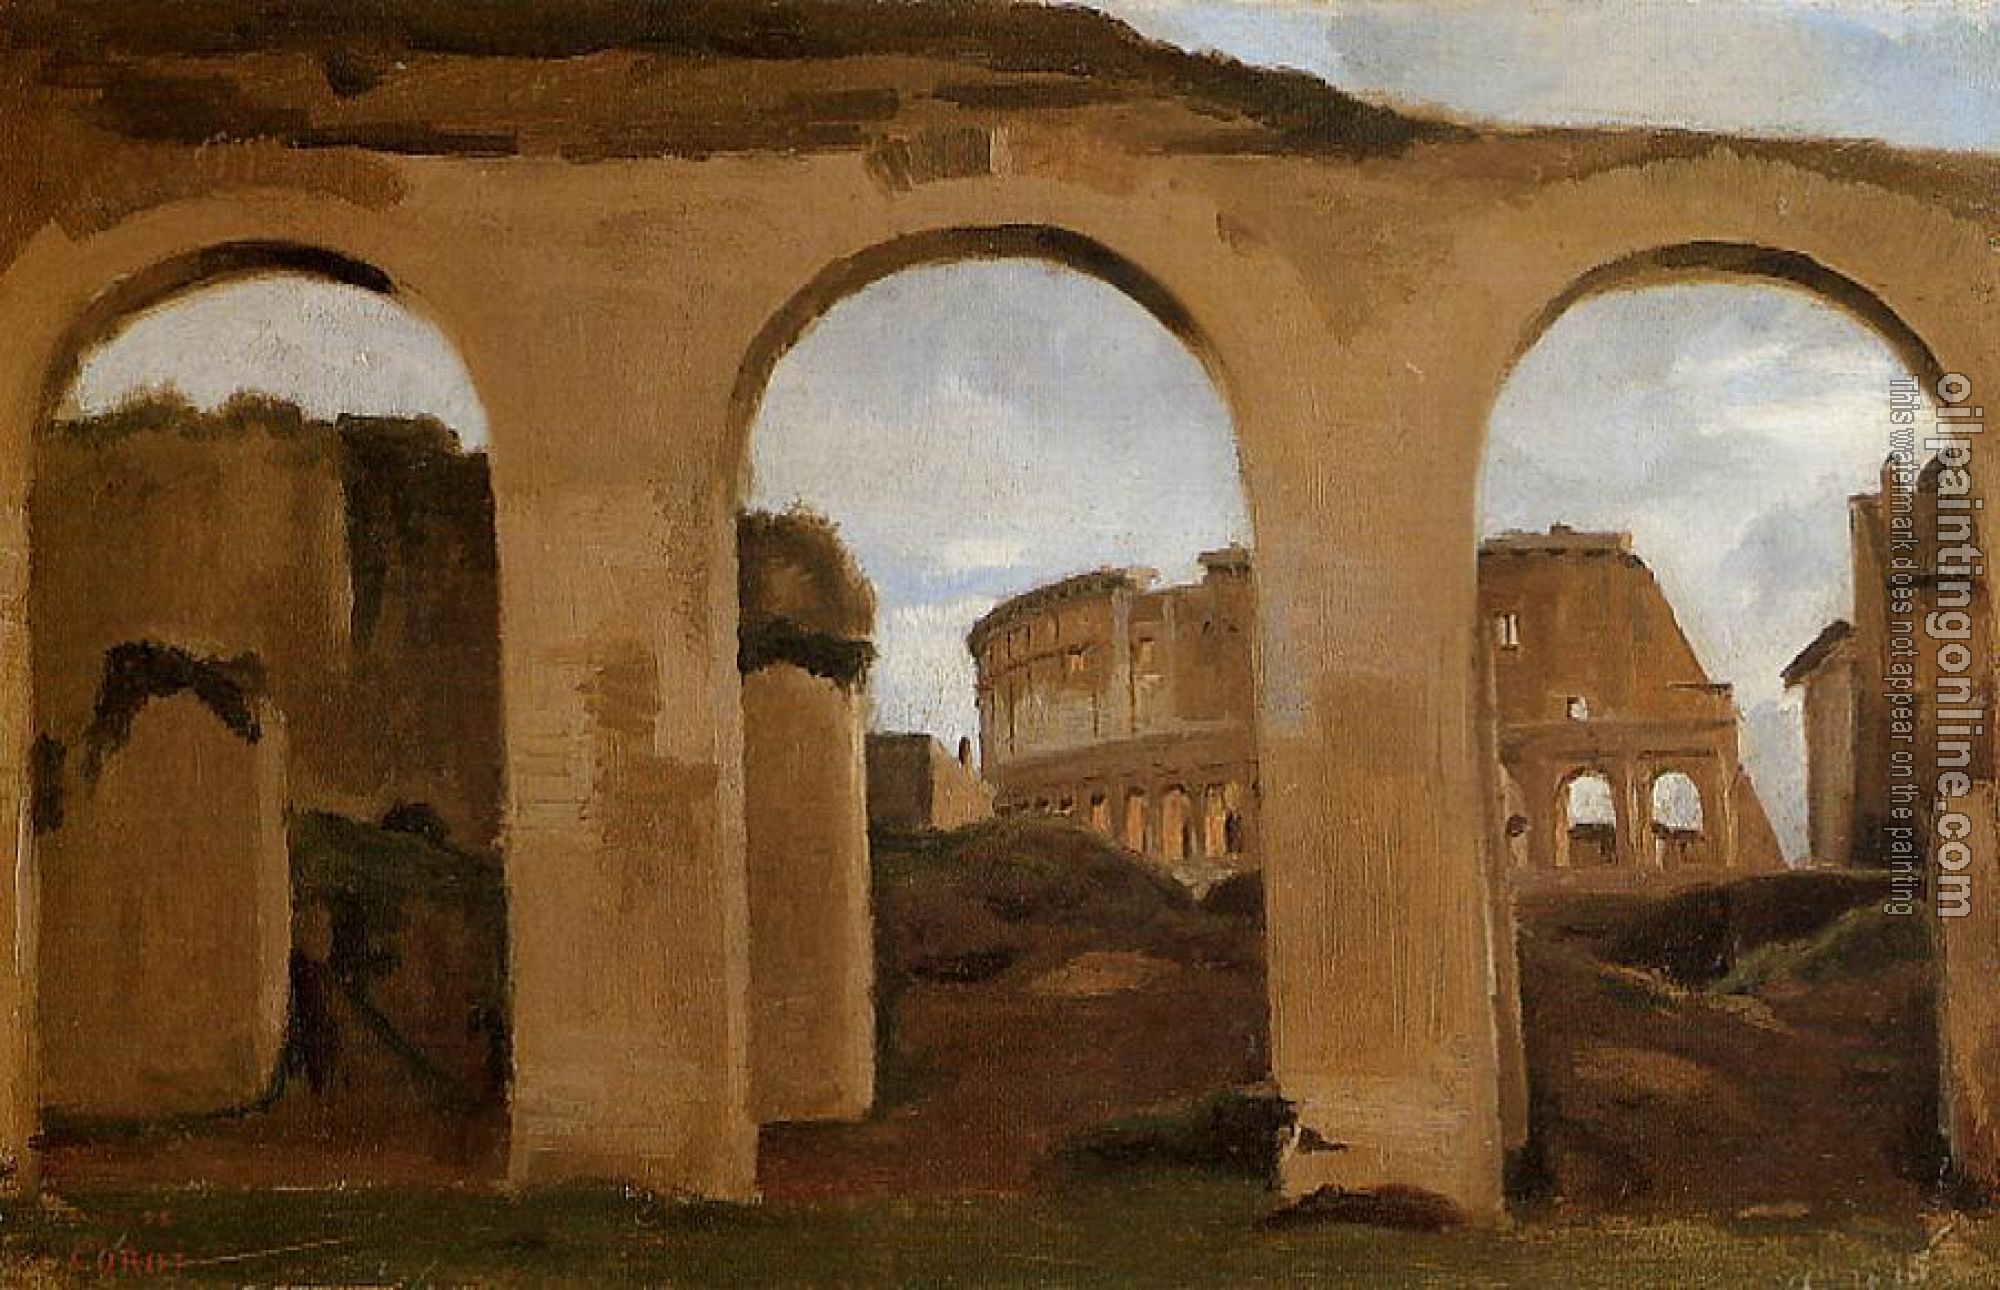 Corot, Jean-Baptiste-Camille - Rome - The Coliseum Seen through Arches of the Basilica of Constantine